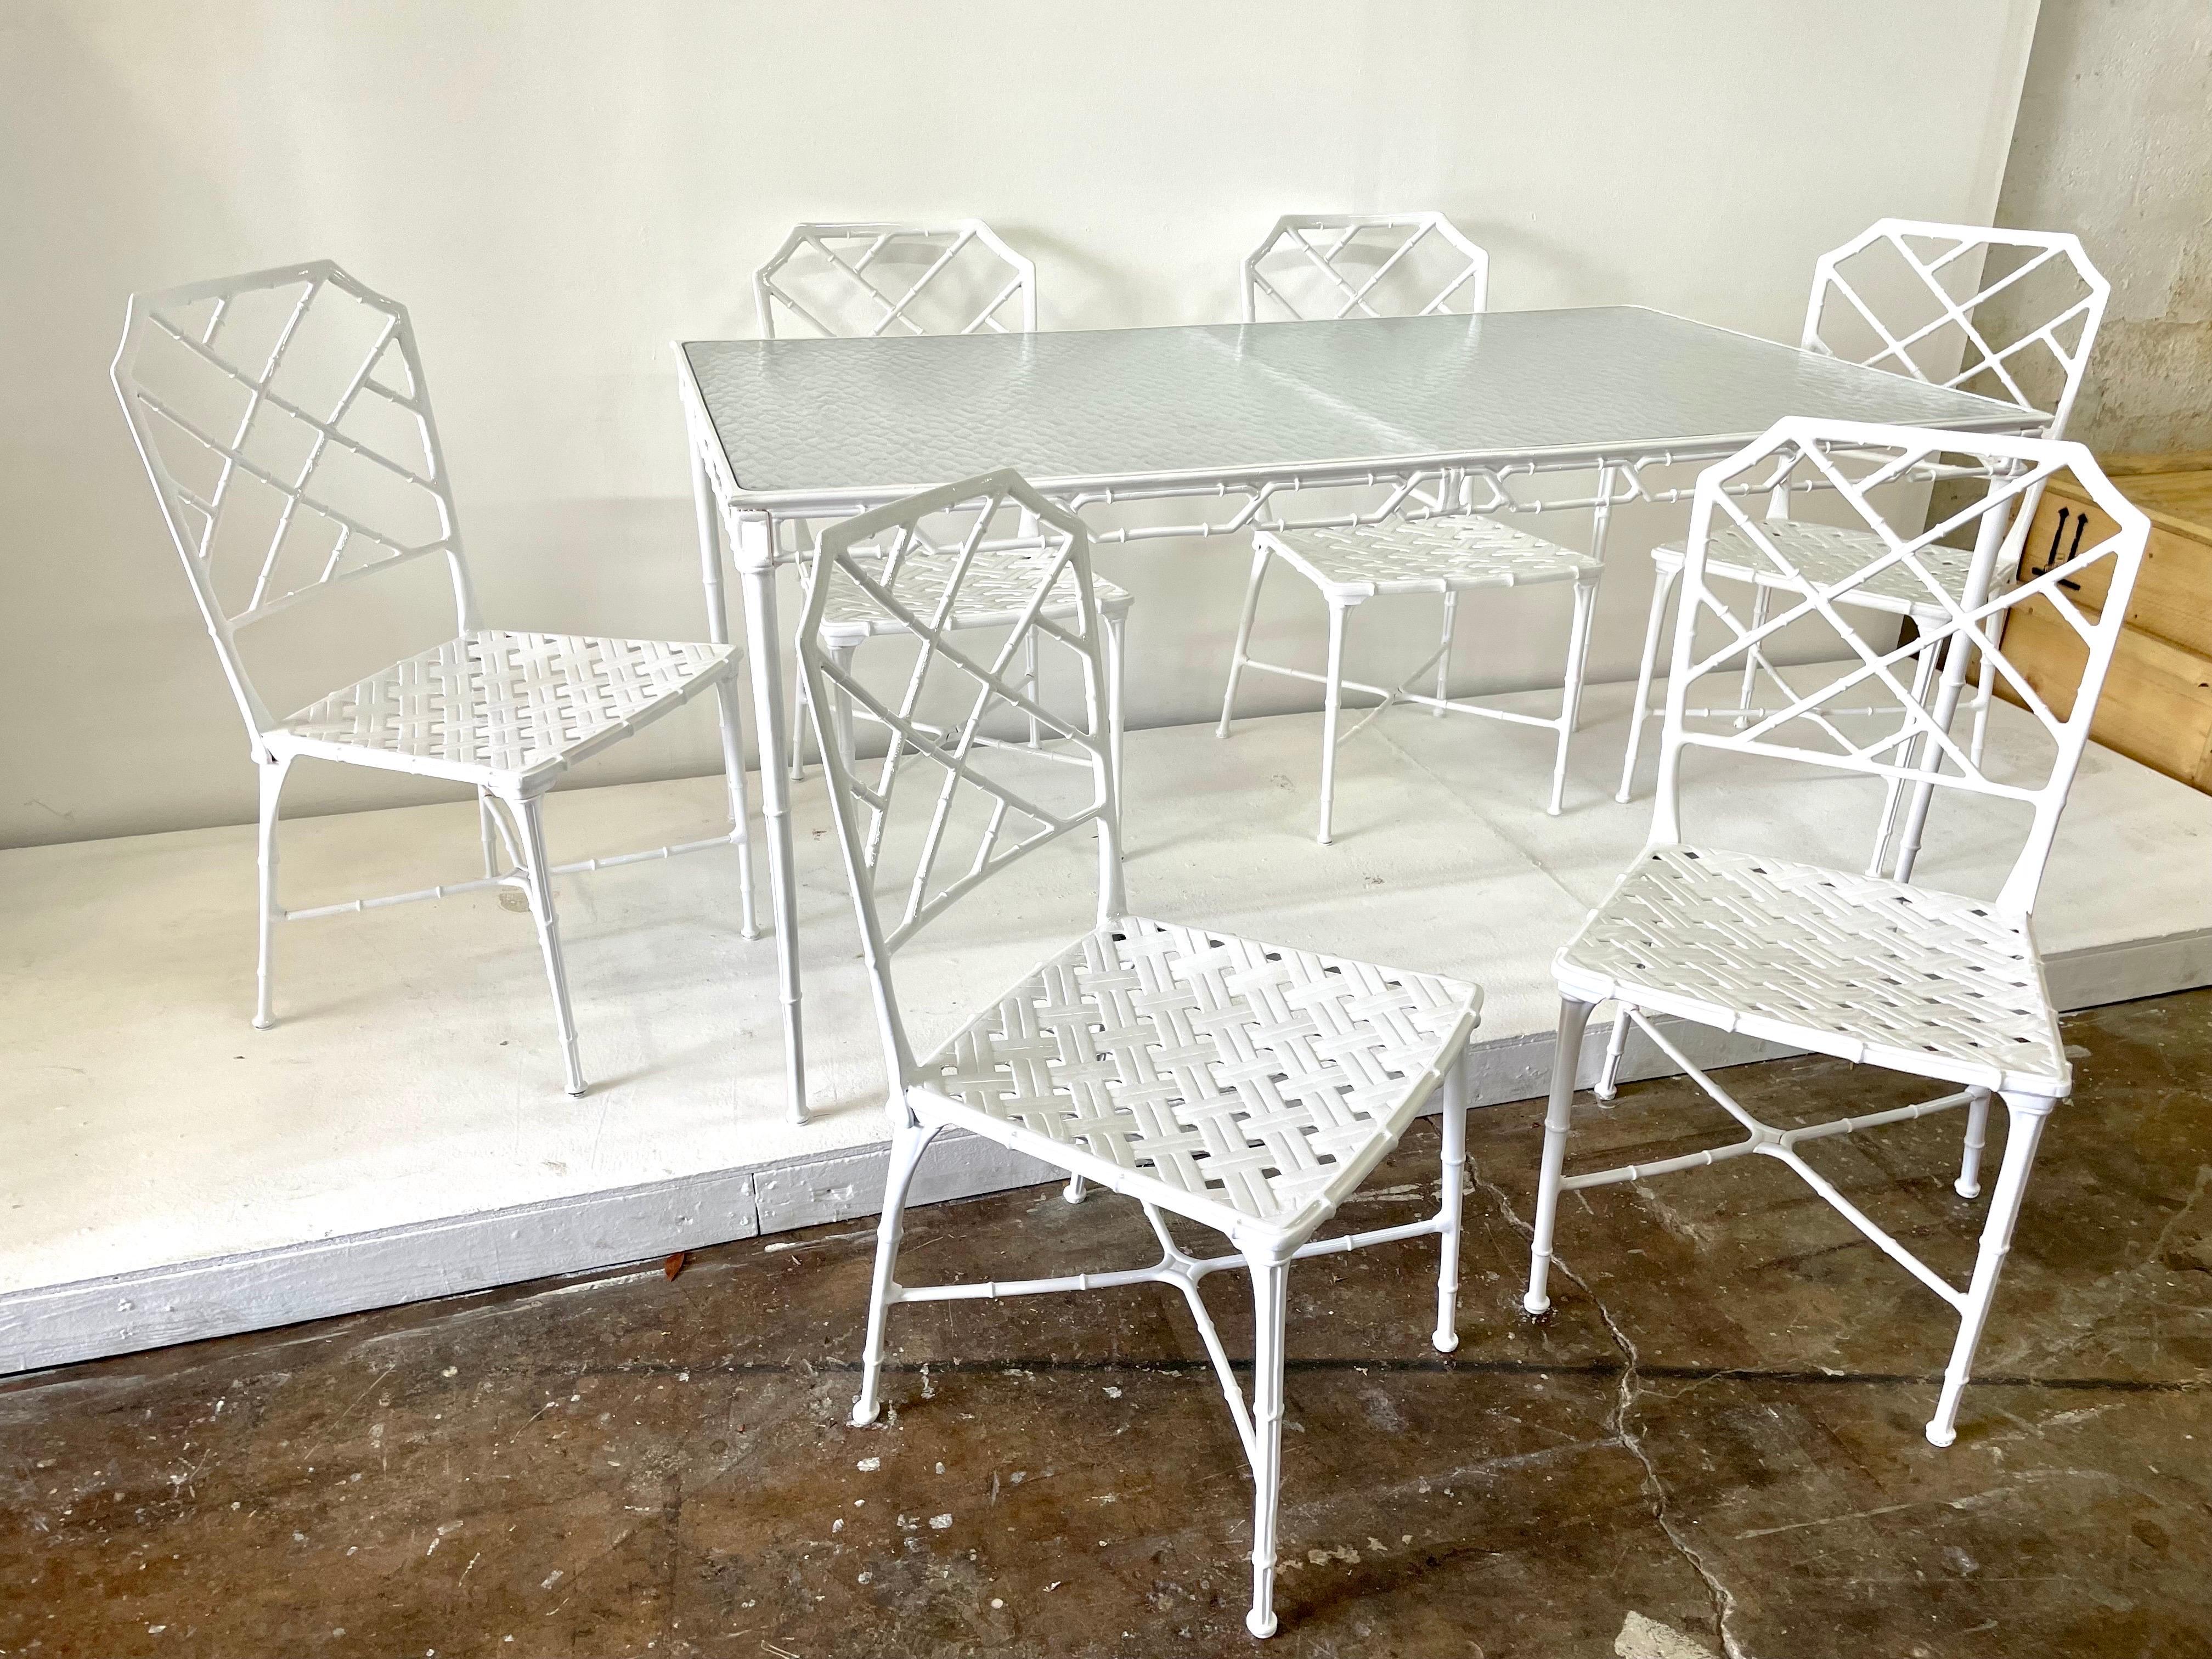 Classic dining set of Chinese Chippendale faux bamboo 6 chairs and table in classic white for outdoor, garden or patio. Recently powder coated white over cast aluminum. Designed by Hall Bradley for Brown Jordan, 1967. Dimensions: CHAIRS Armless =